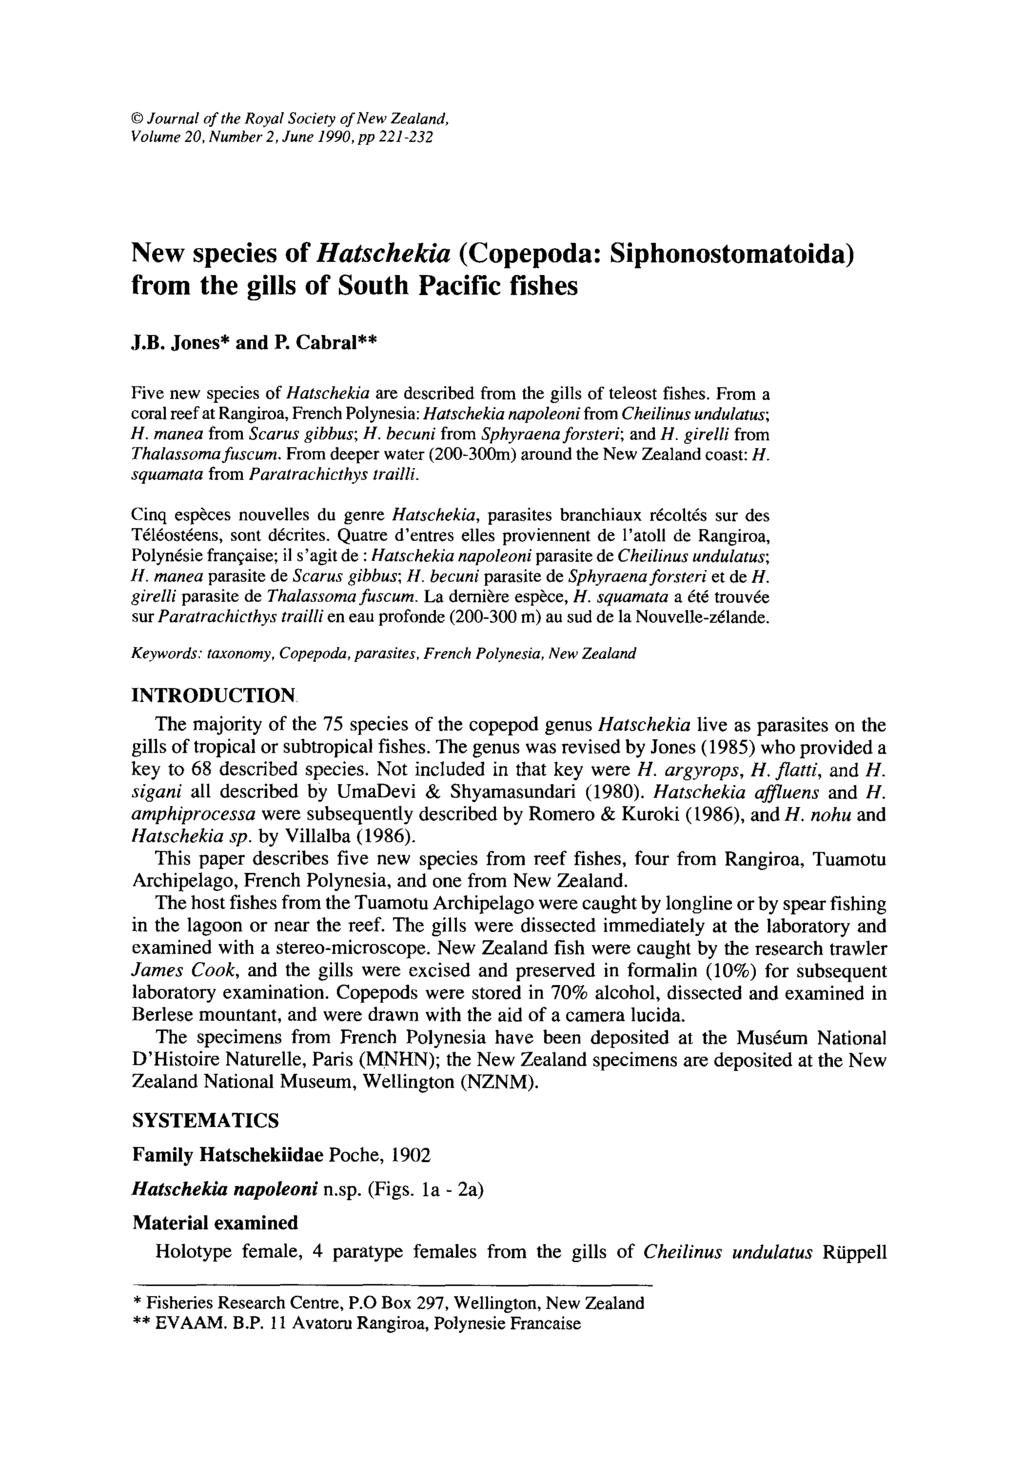 Journal of the Royal Society of New Zealand, Volume 20, Number 2,June 1990, pp 221-232 New species of Hatschekia (Copepoda: Siphonostomatoida) from the gills of South Pacific fishes J.B. Jones* and P.